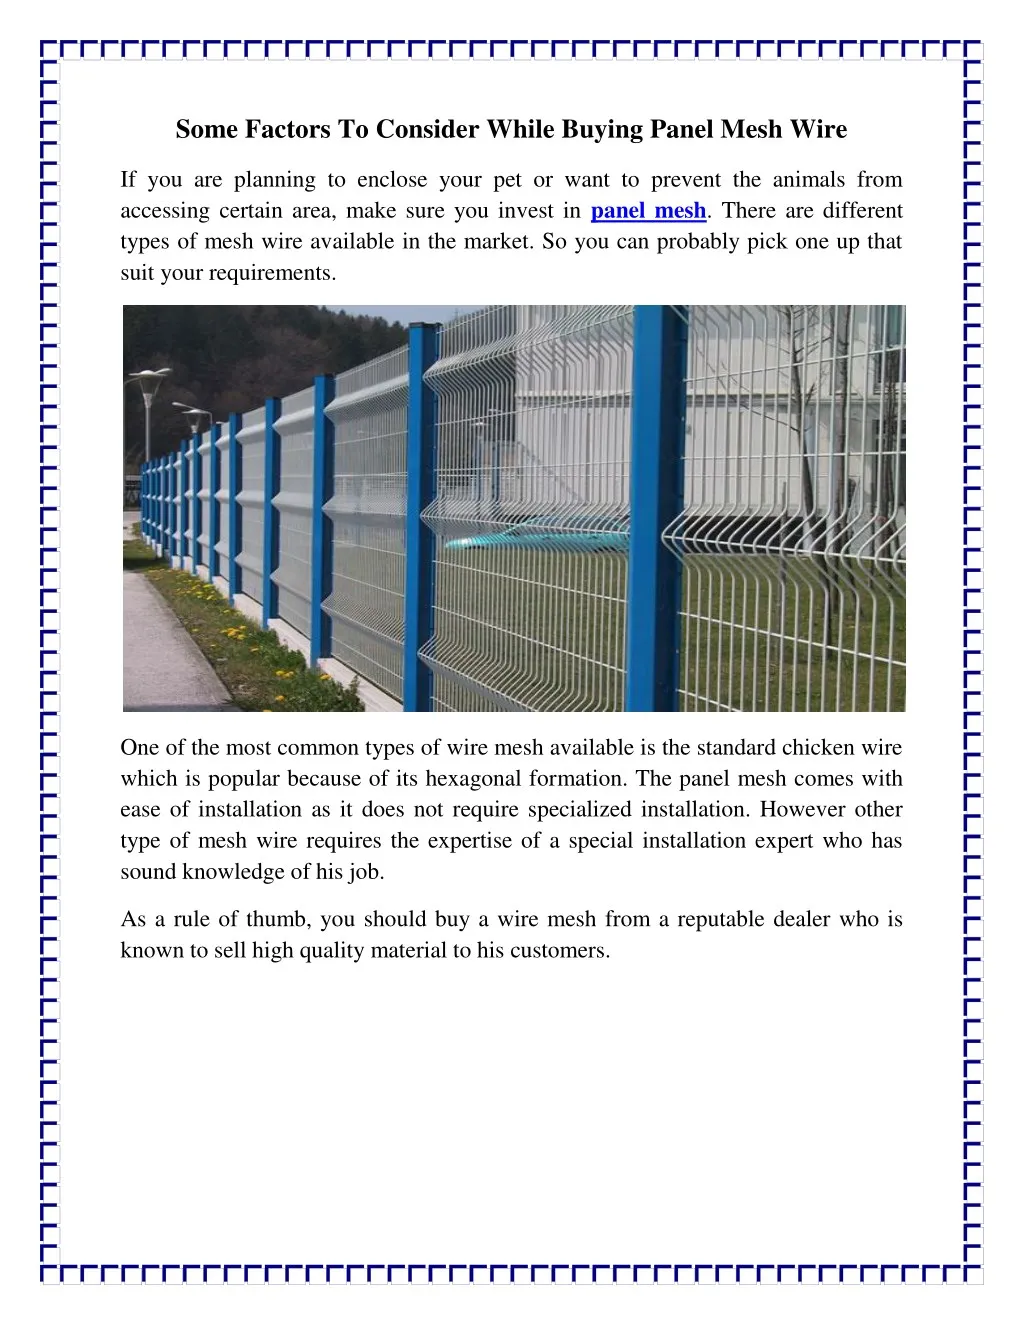 some factors to consider while buying panel mesh